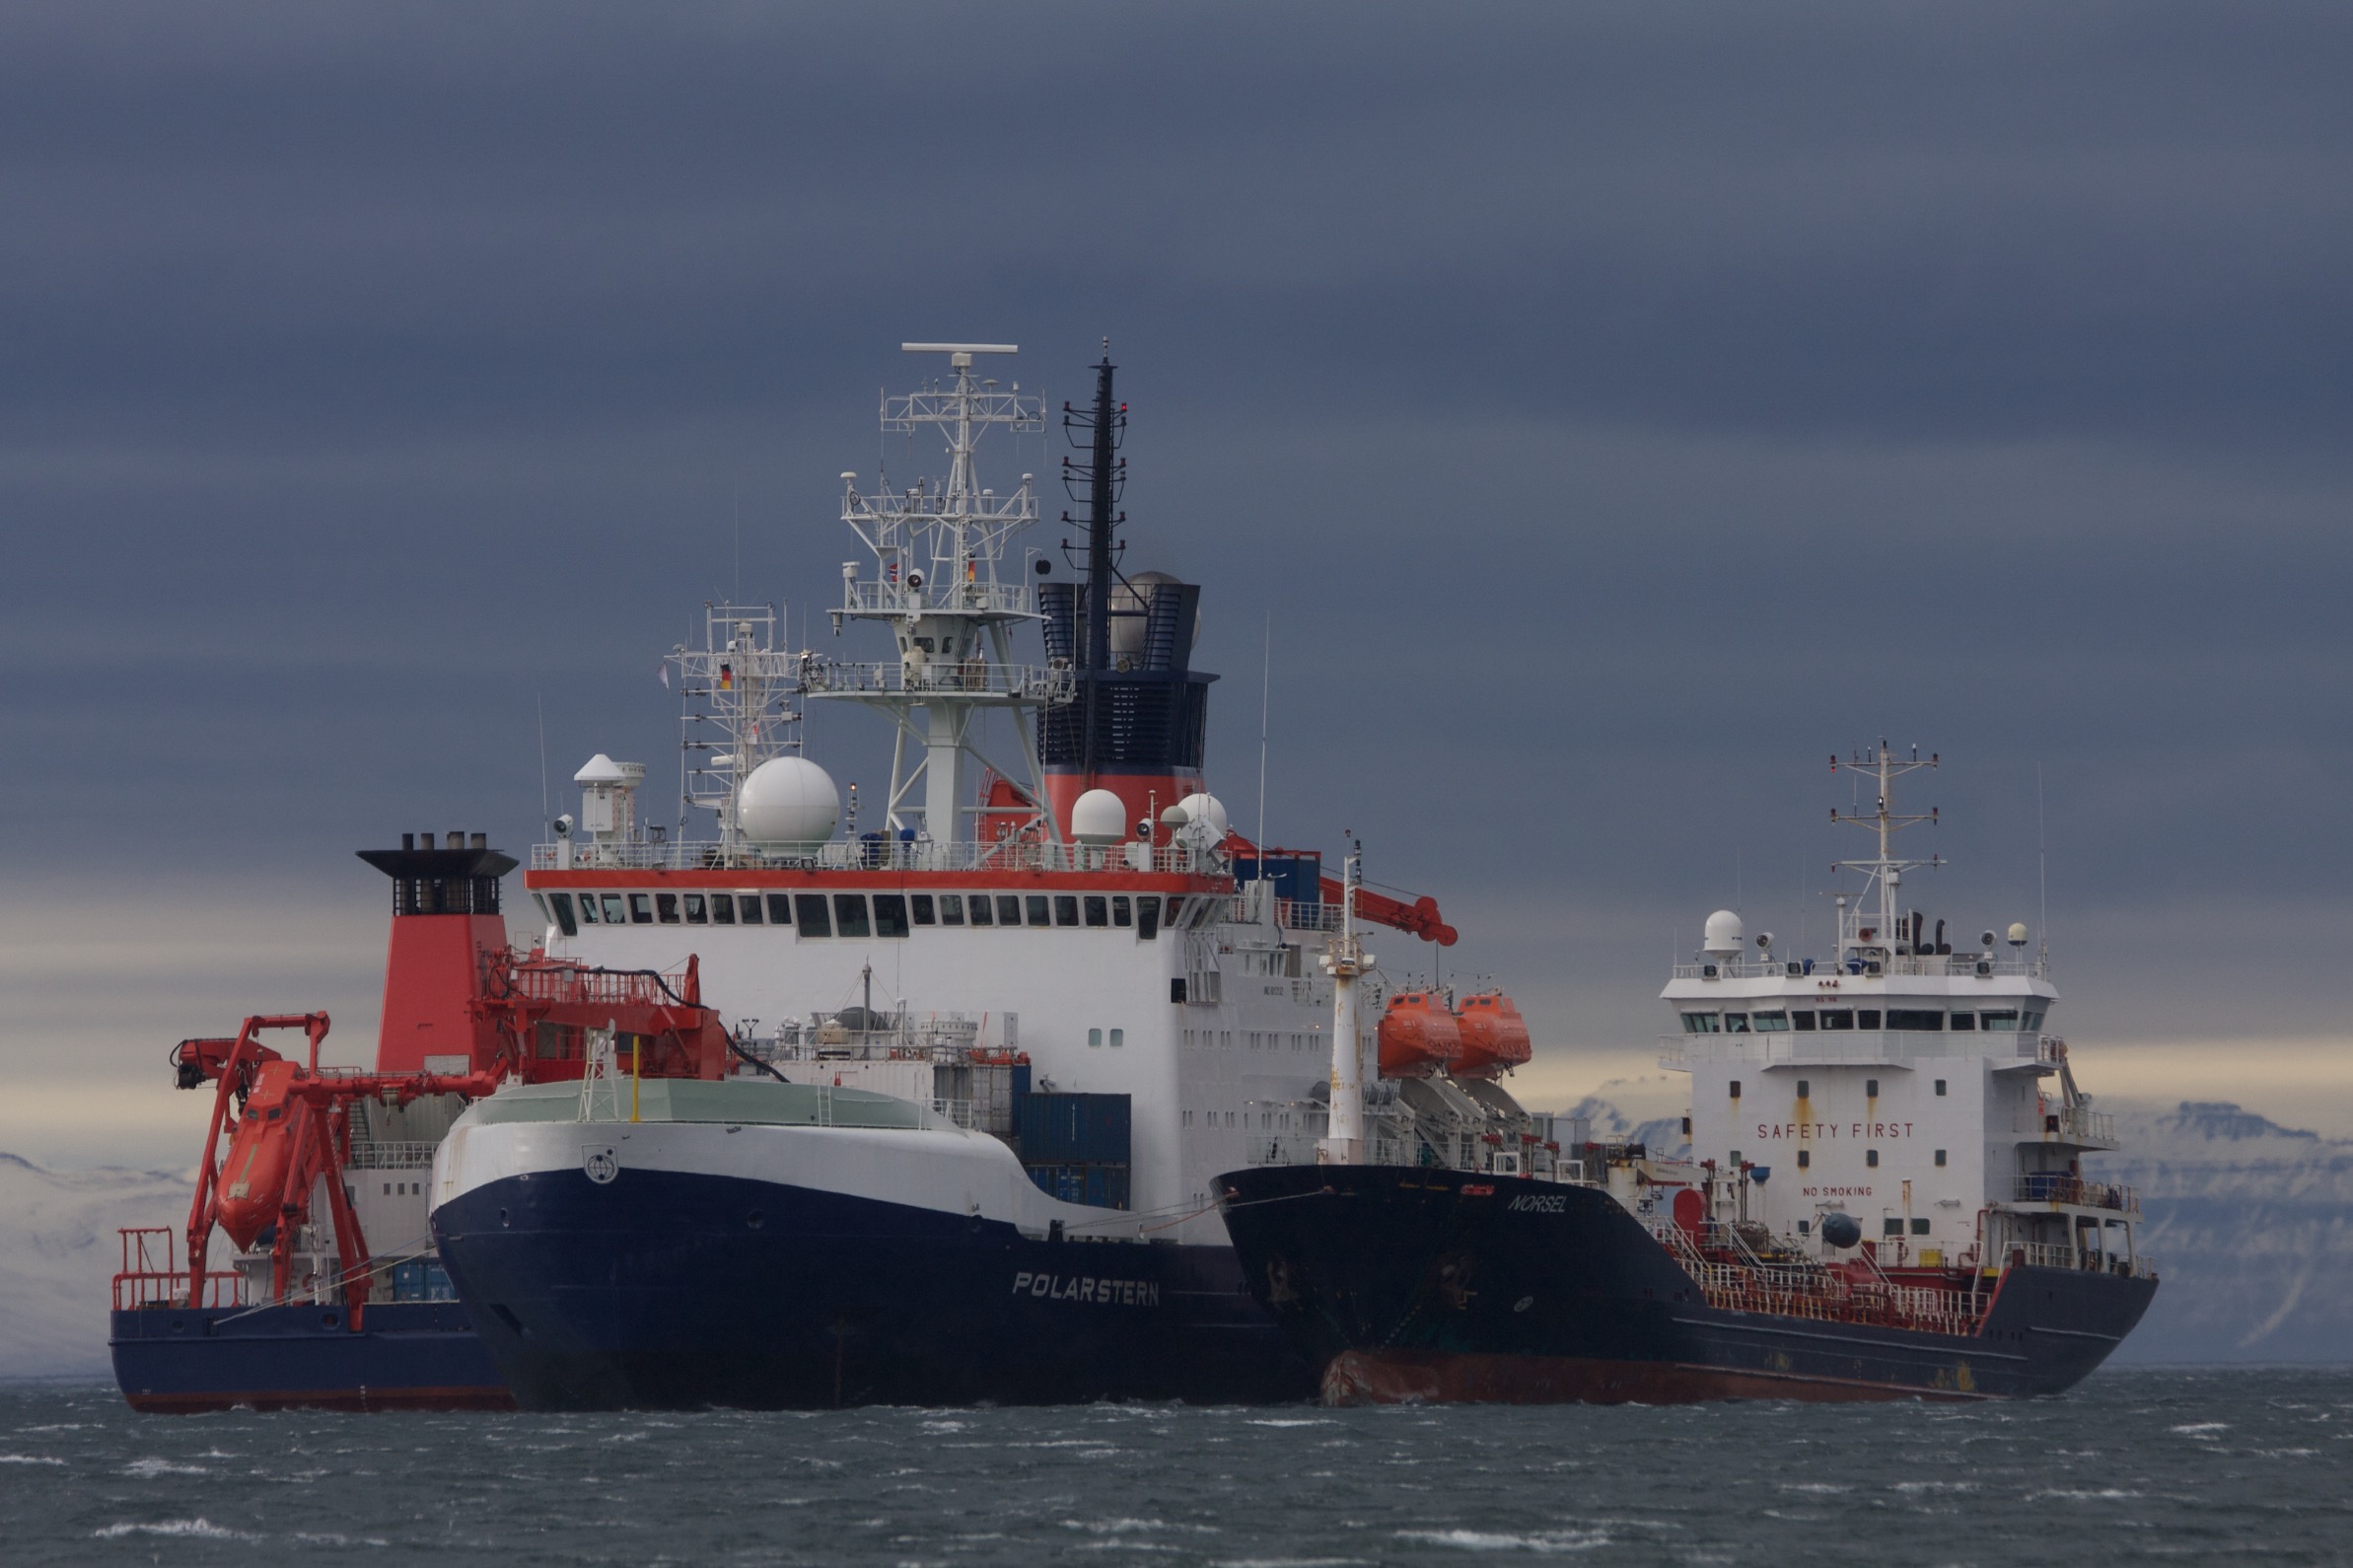 The R/V Polarstern (left) helps carry out the crew exchange and supply delivery for MOSAiC Leg 4 in early June 2020 near Svalbard, Norway. Photo credit: Leonard Magerl, Alfred Wegener Institute.